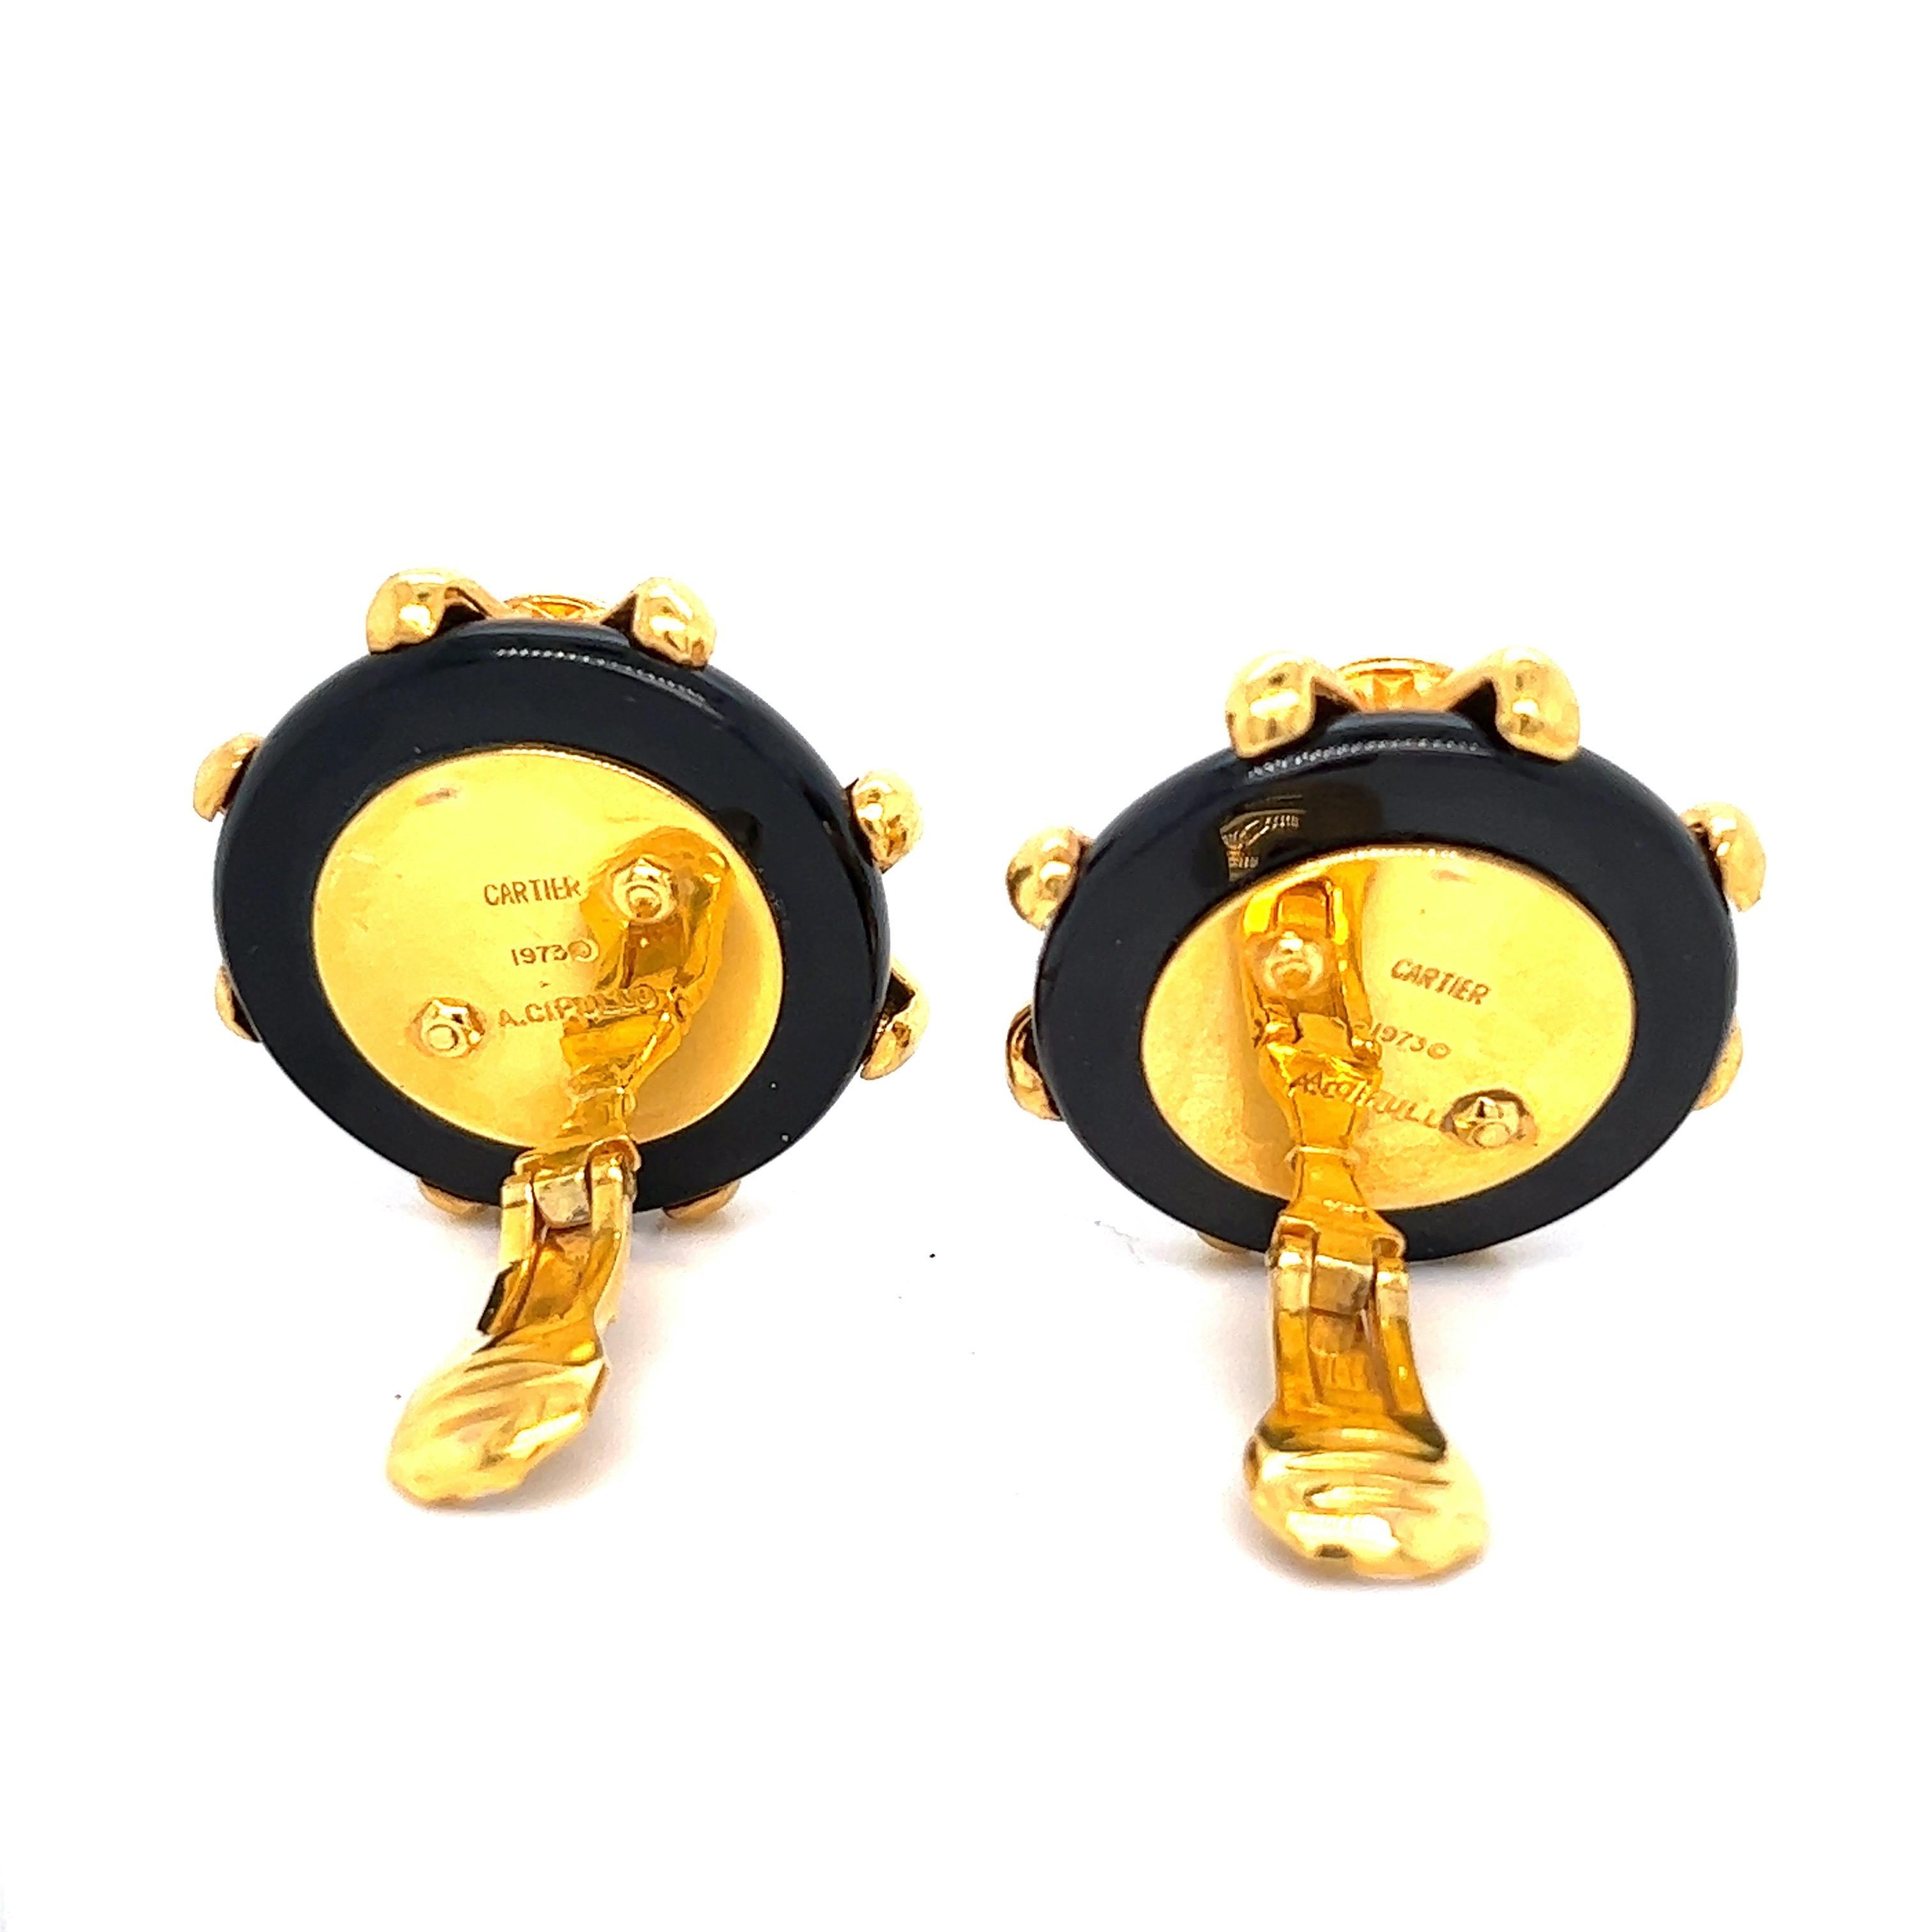 Women's Aldo Cipullo for Cartier Gold and Onyx Ear Clips